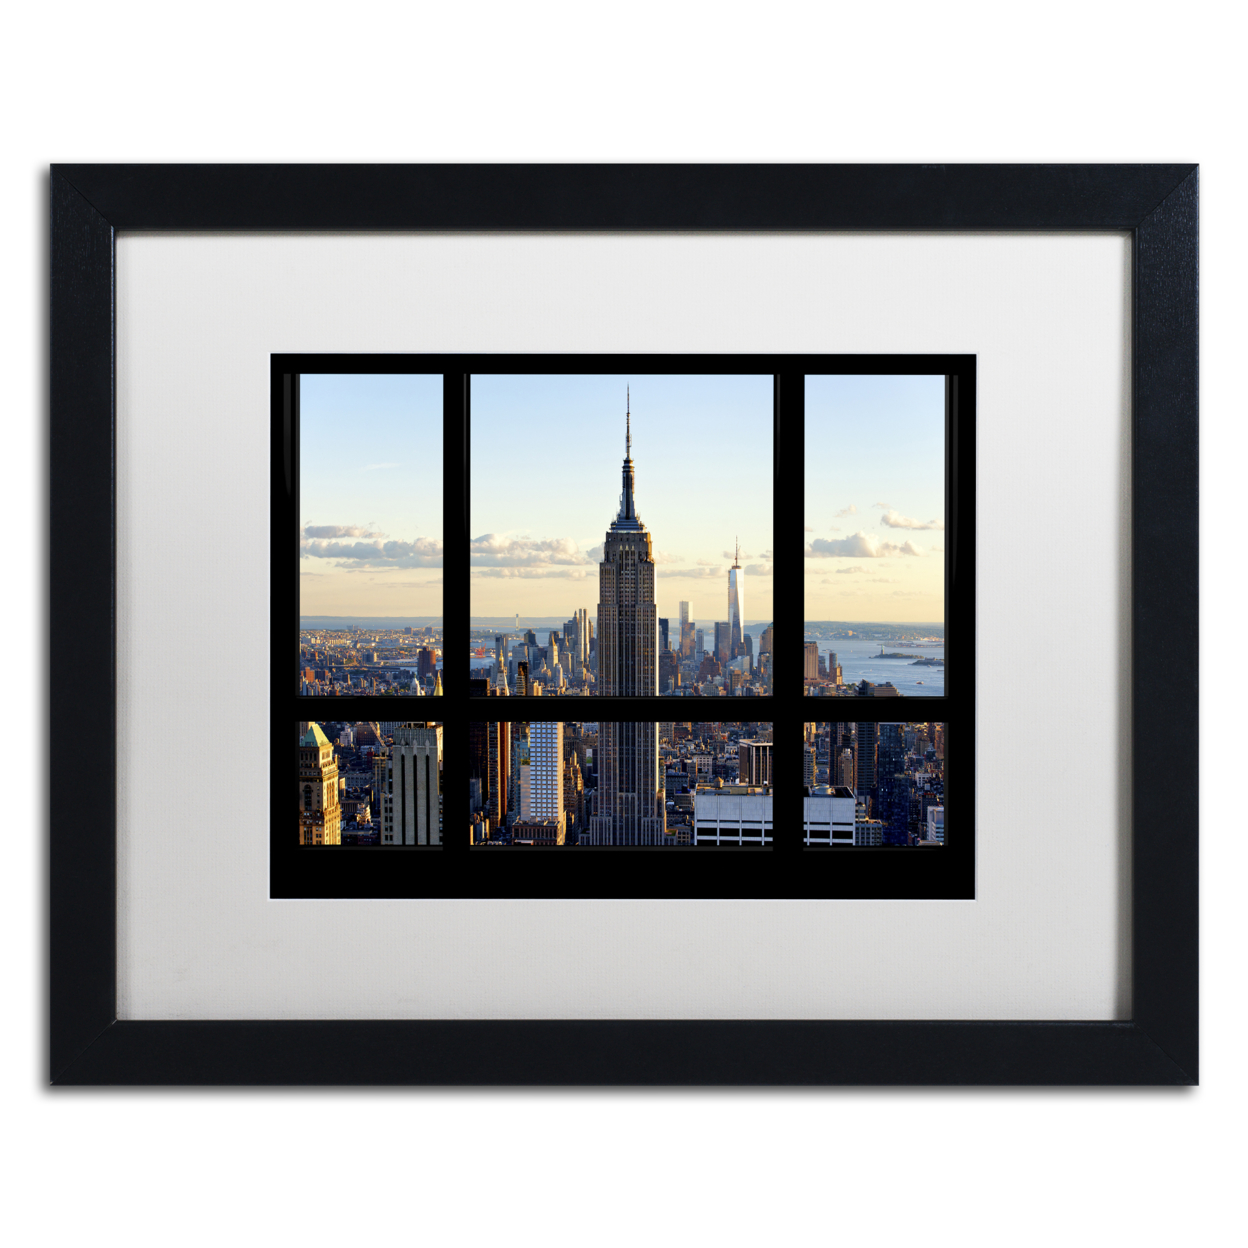 Philippe Hugonnard 'New York Window View' Black Wooden Framed Art 18 X 22 Inches